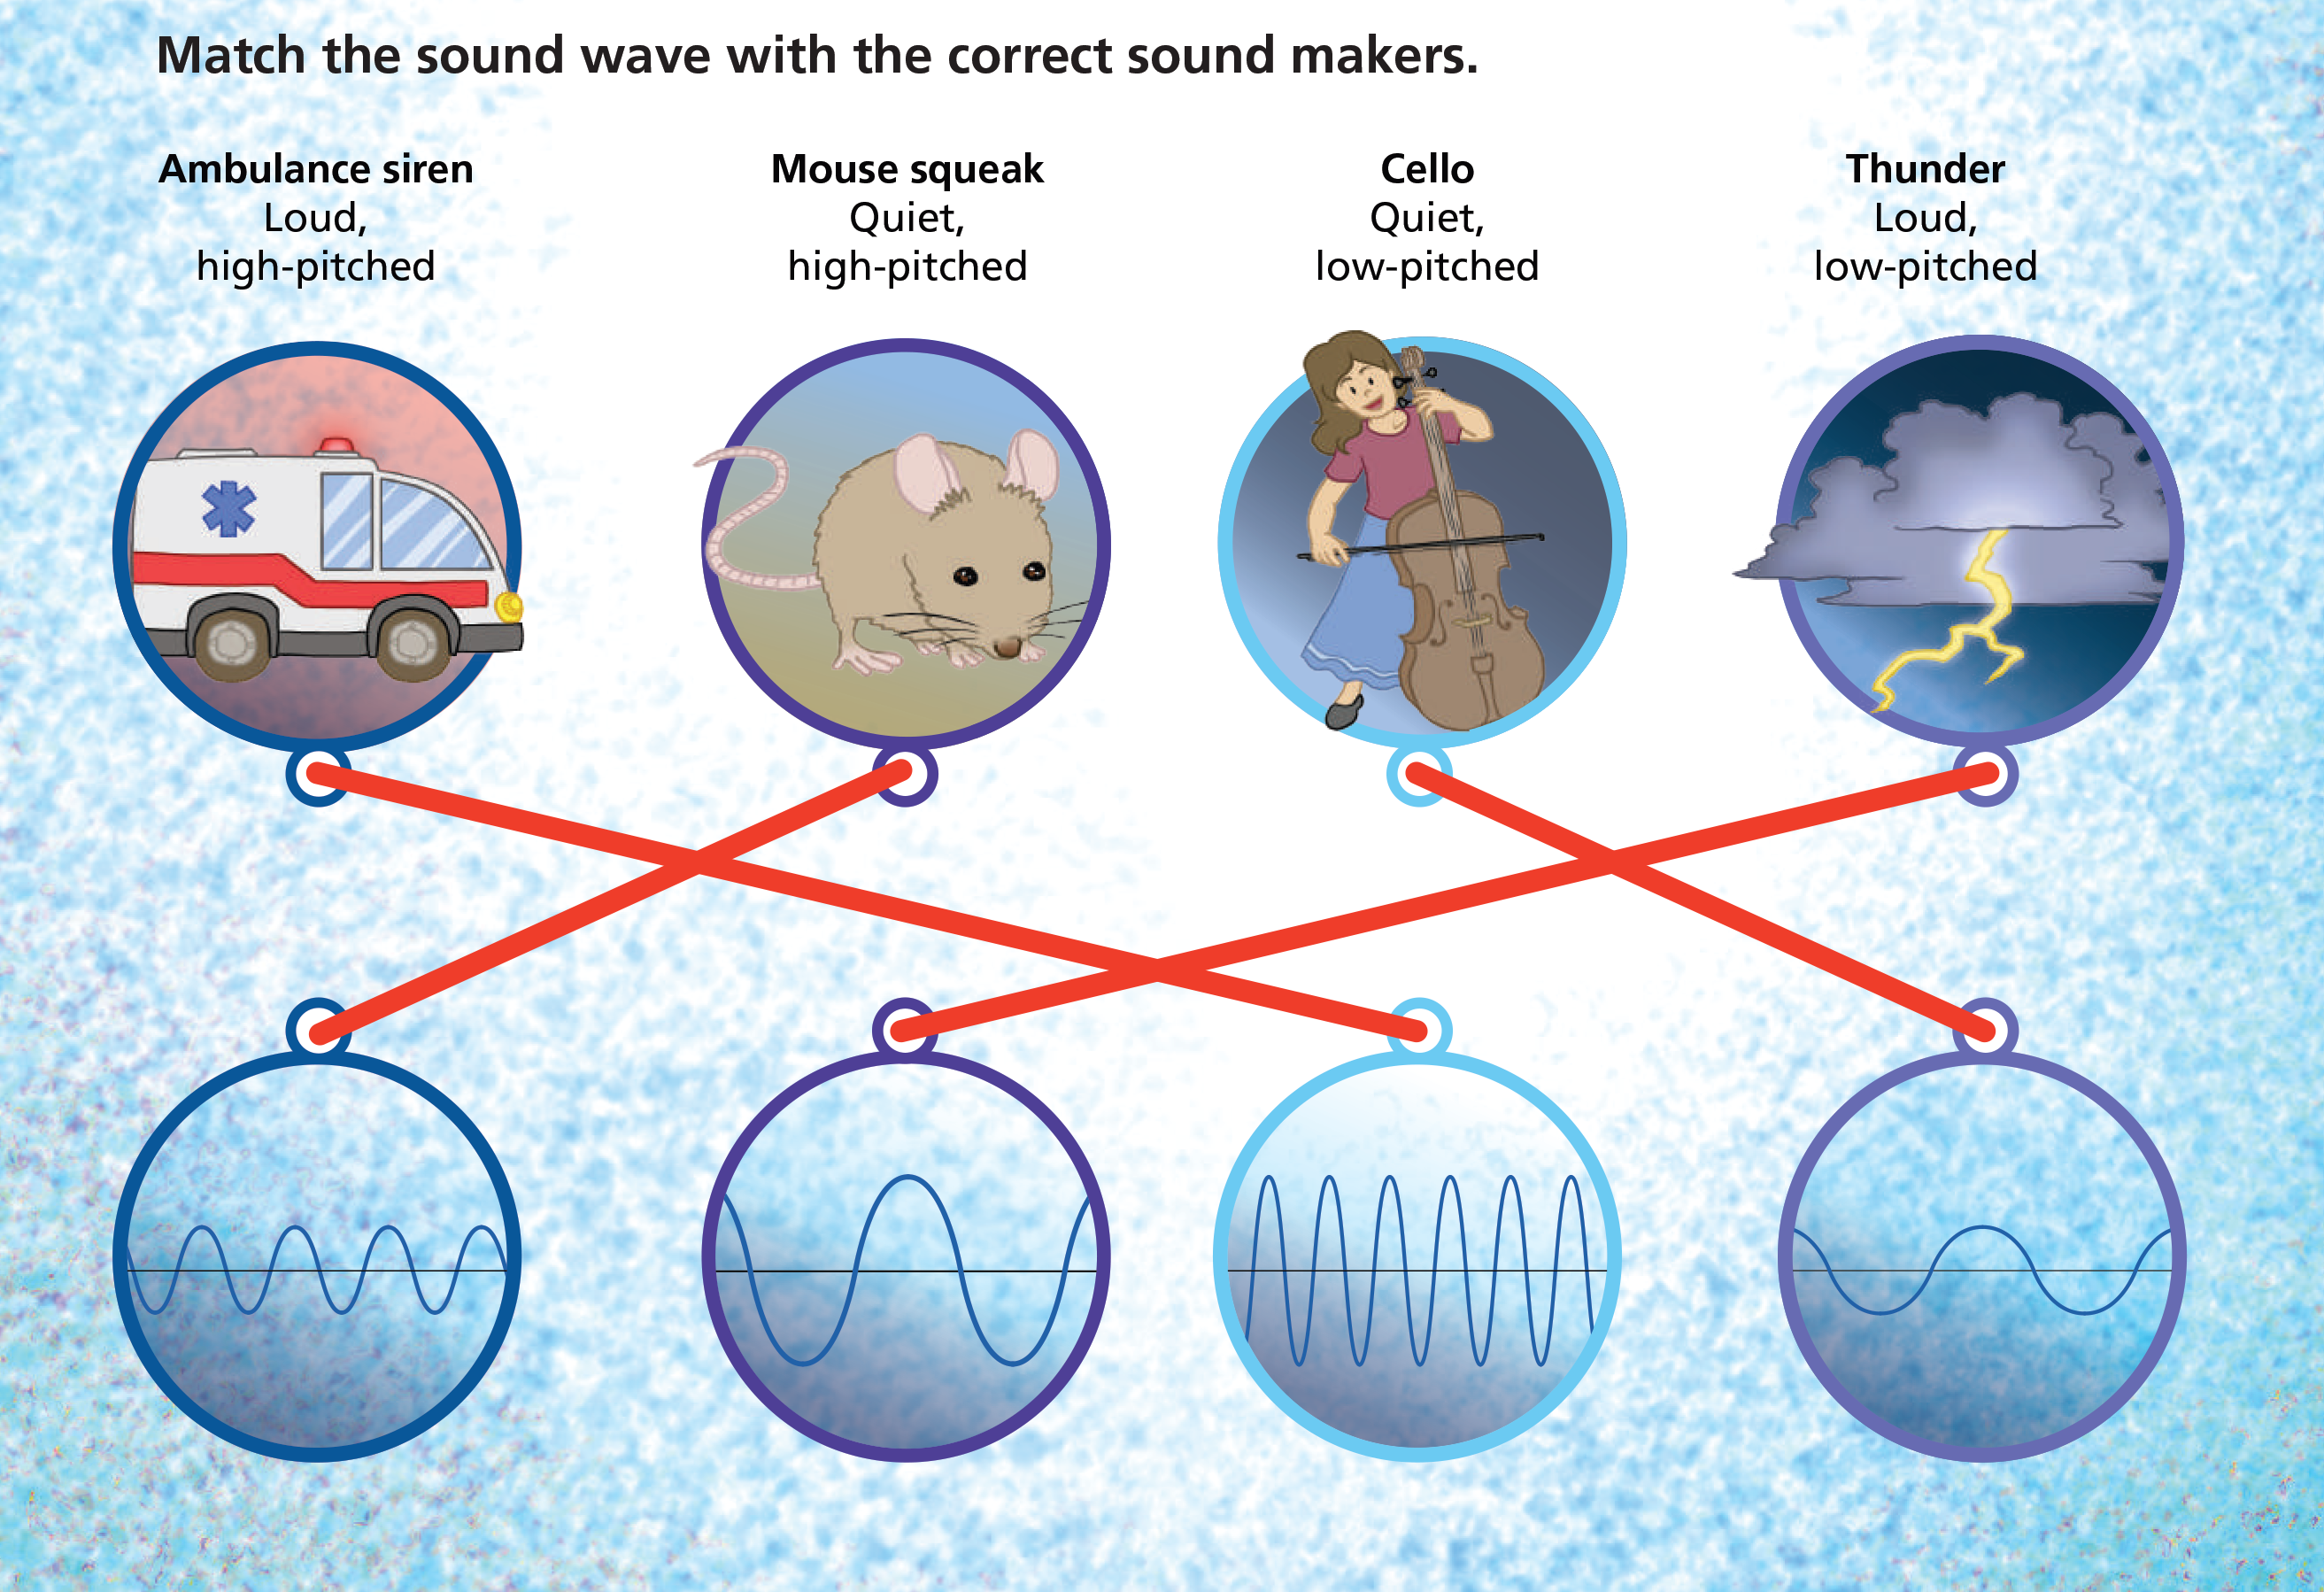 graphic with 4 images in a row on top (left to right: ambulance,mouse,cello,thunderstorm). And 4 images in a row below of sound waves (L to R: 4 short peaks,2 tall peaks,6 tall peaks,2 short peaks). You are asked to match the sound wave to the sound maker